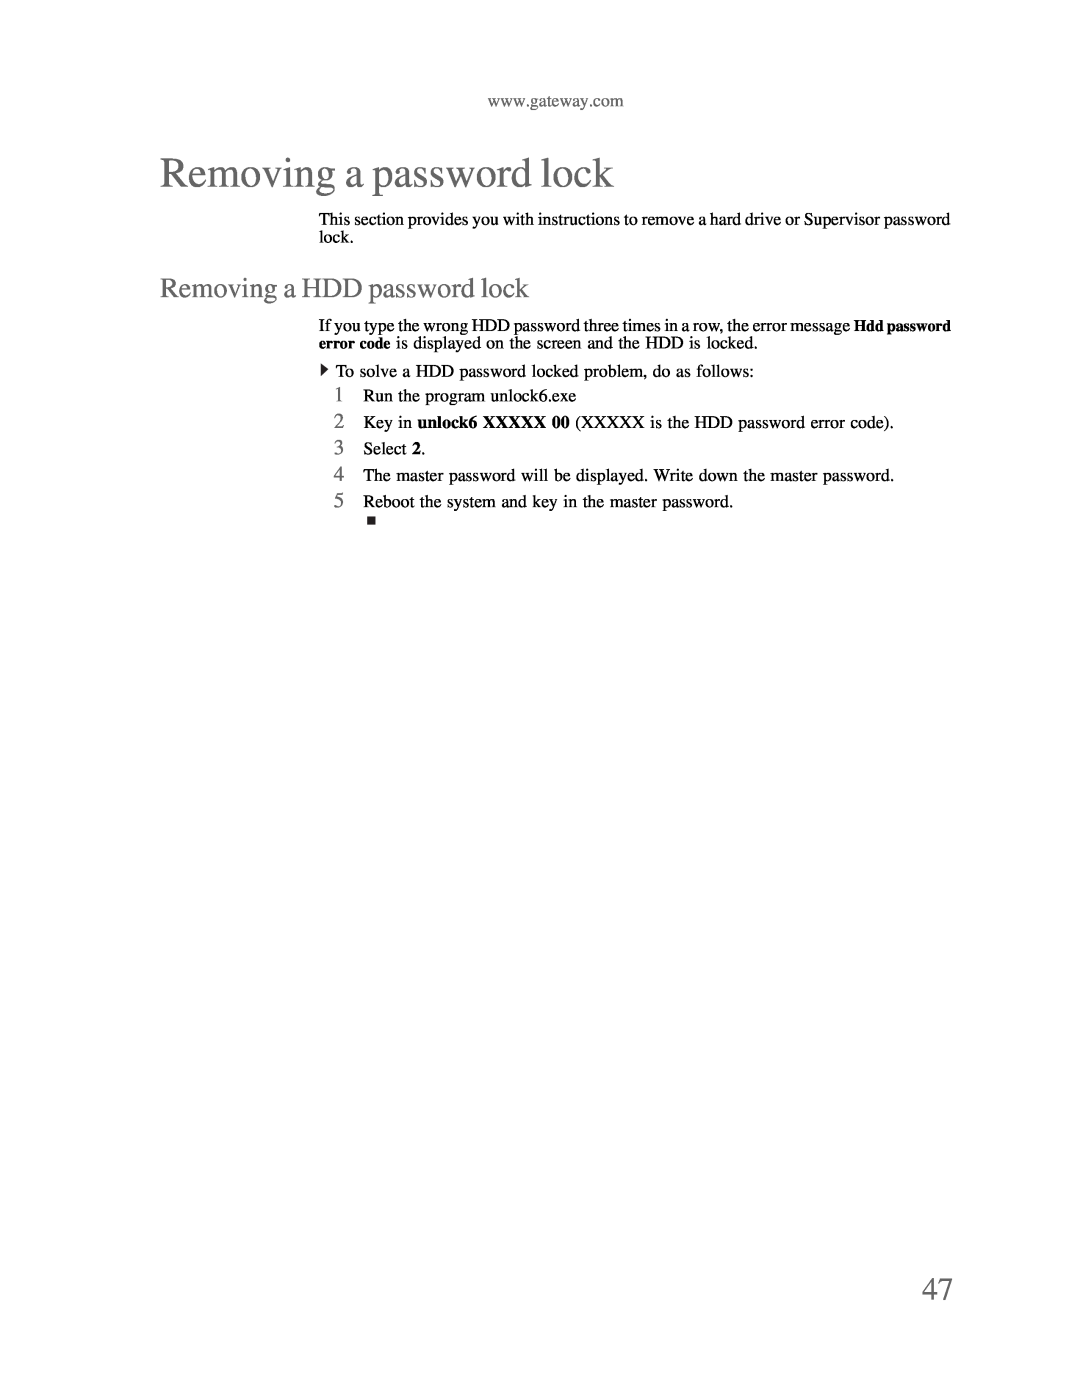 Gateway p-79 manual Removing a password lock, Removing a HDD password lock 